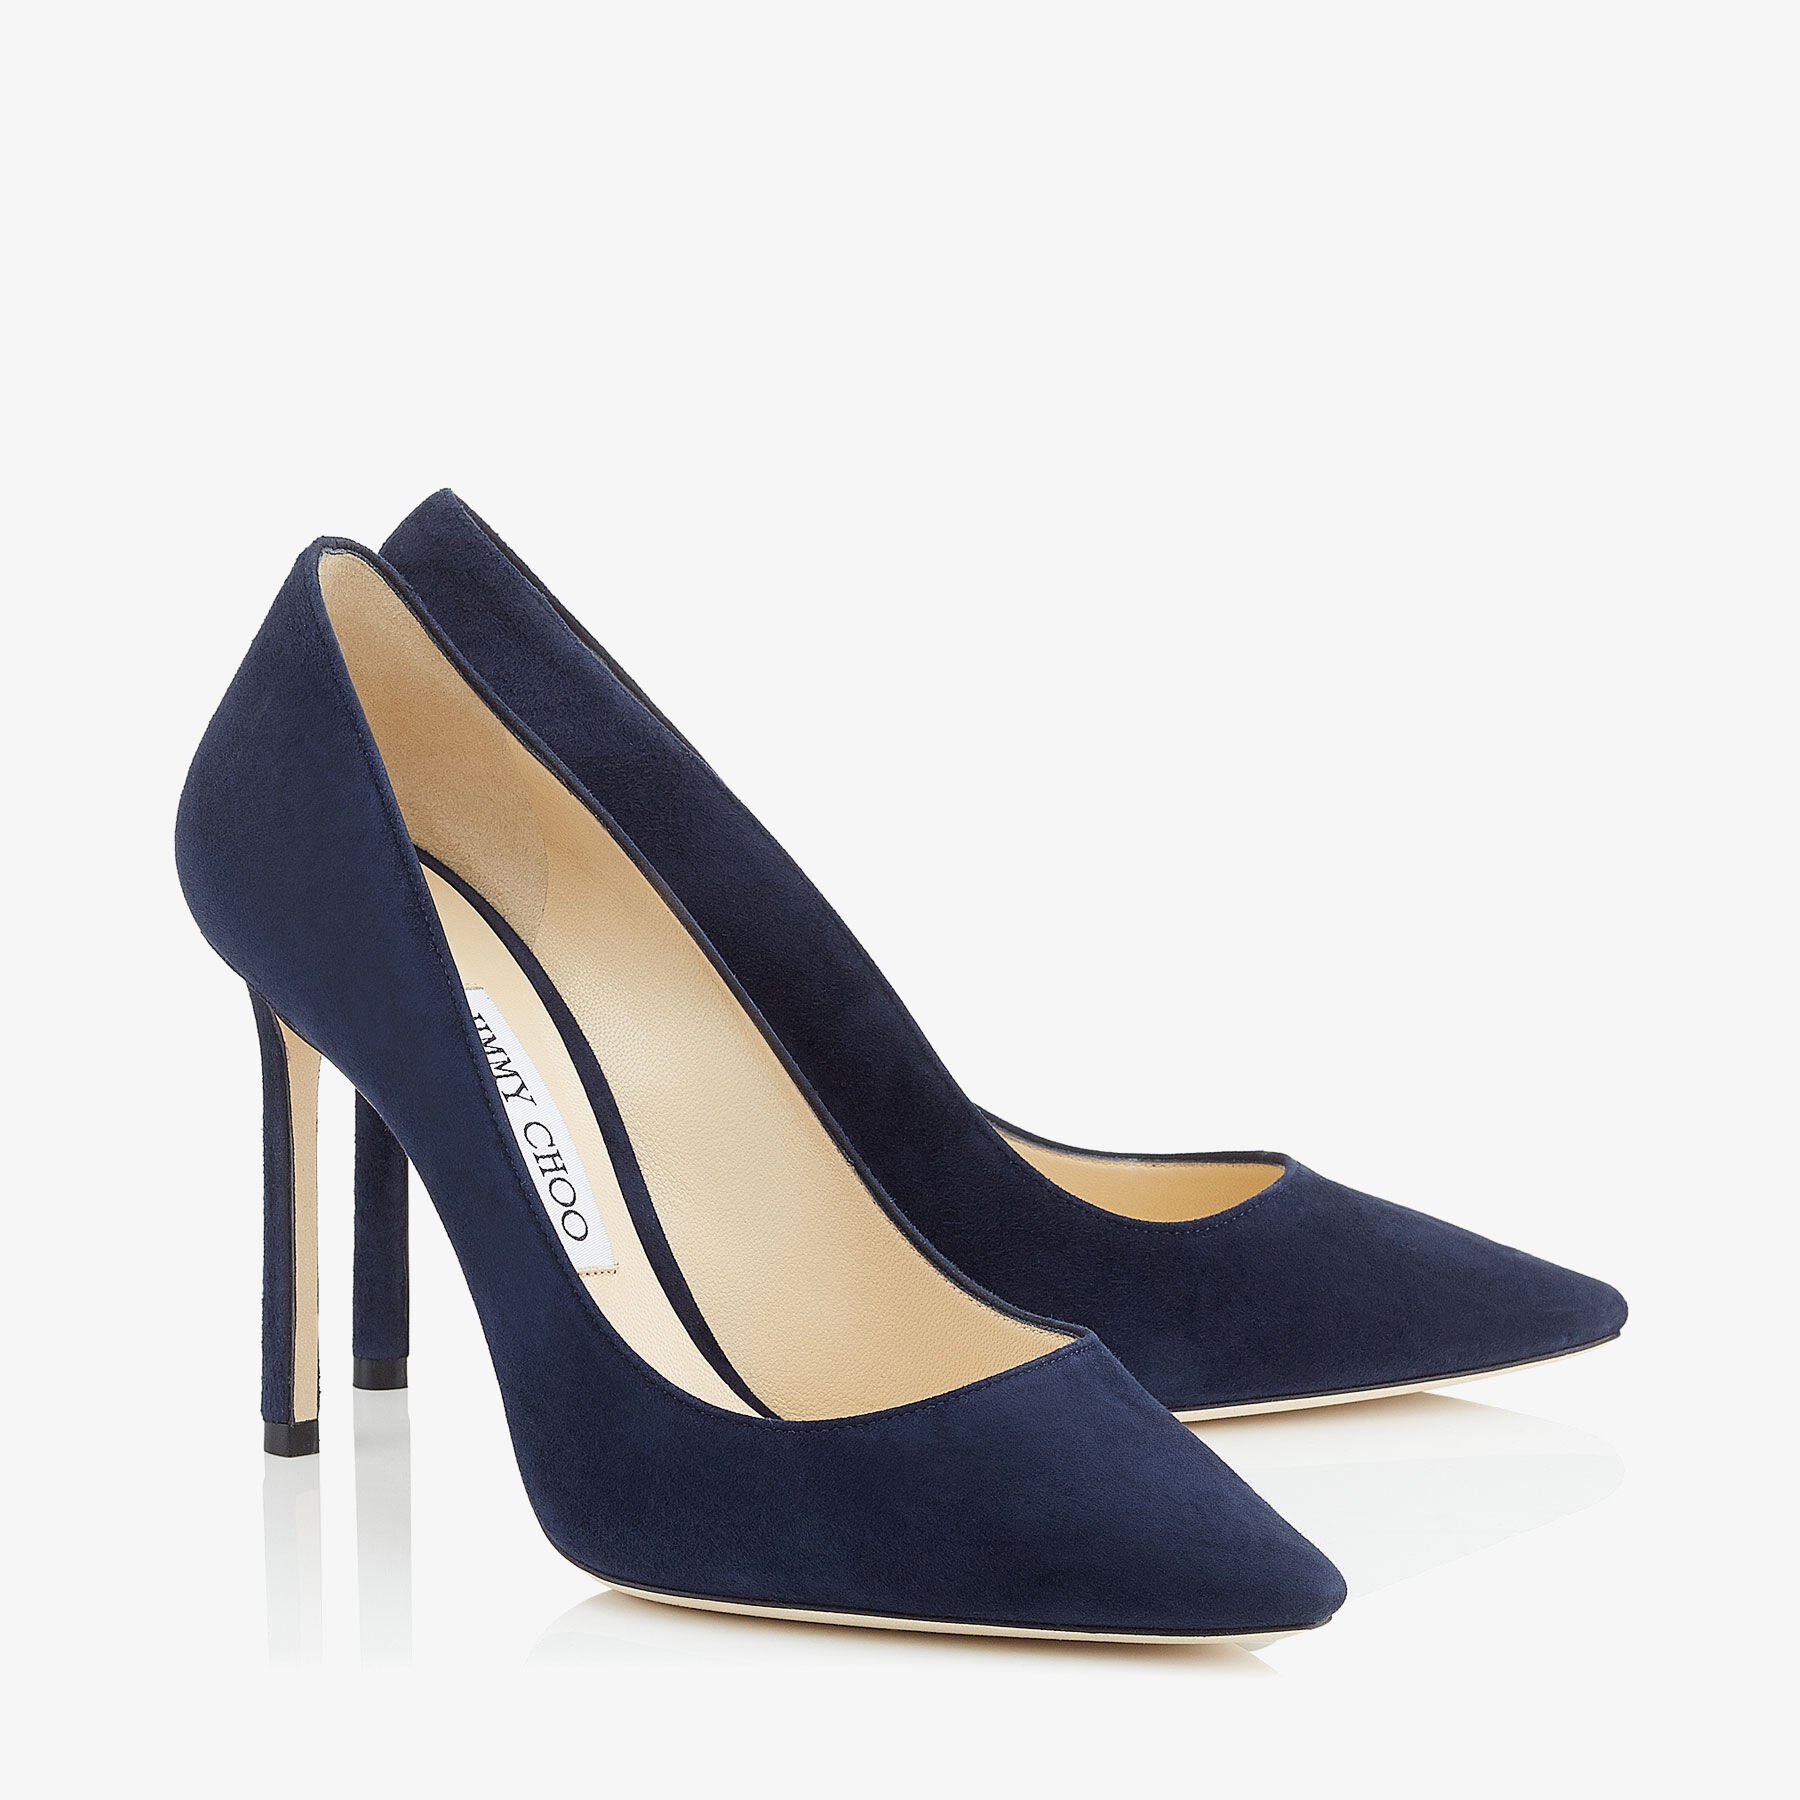 Romy 100
Navy Suede Pointed Pumps - 3